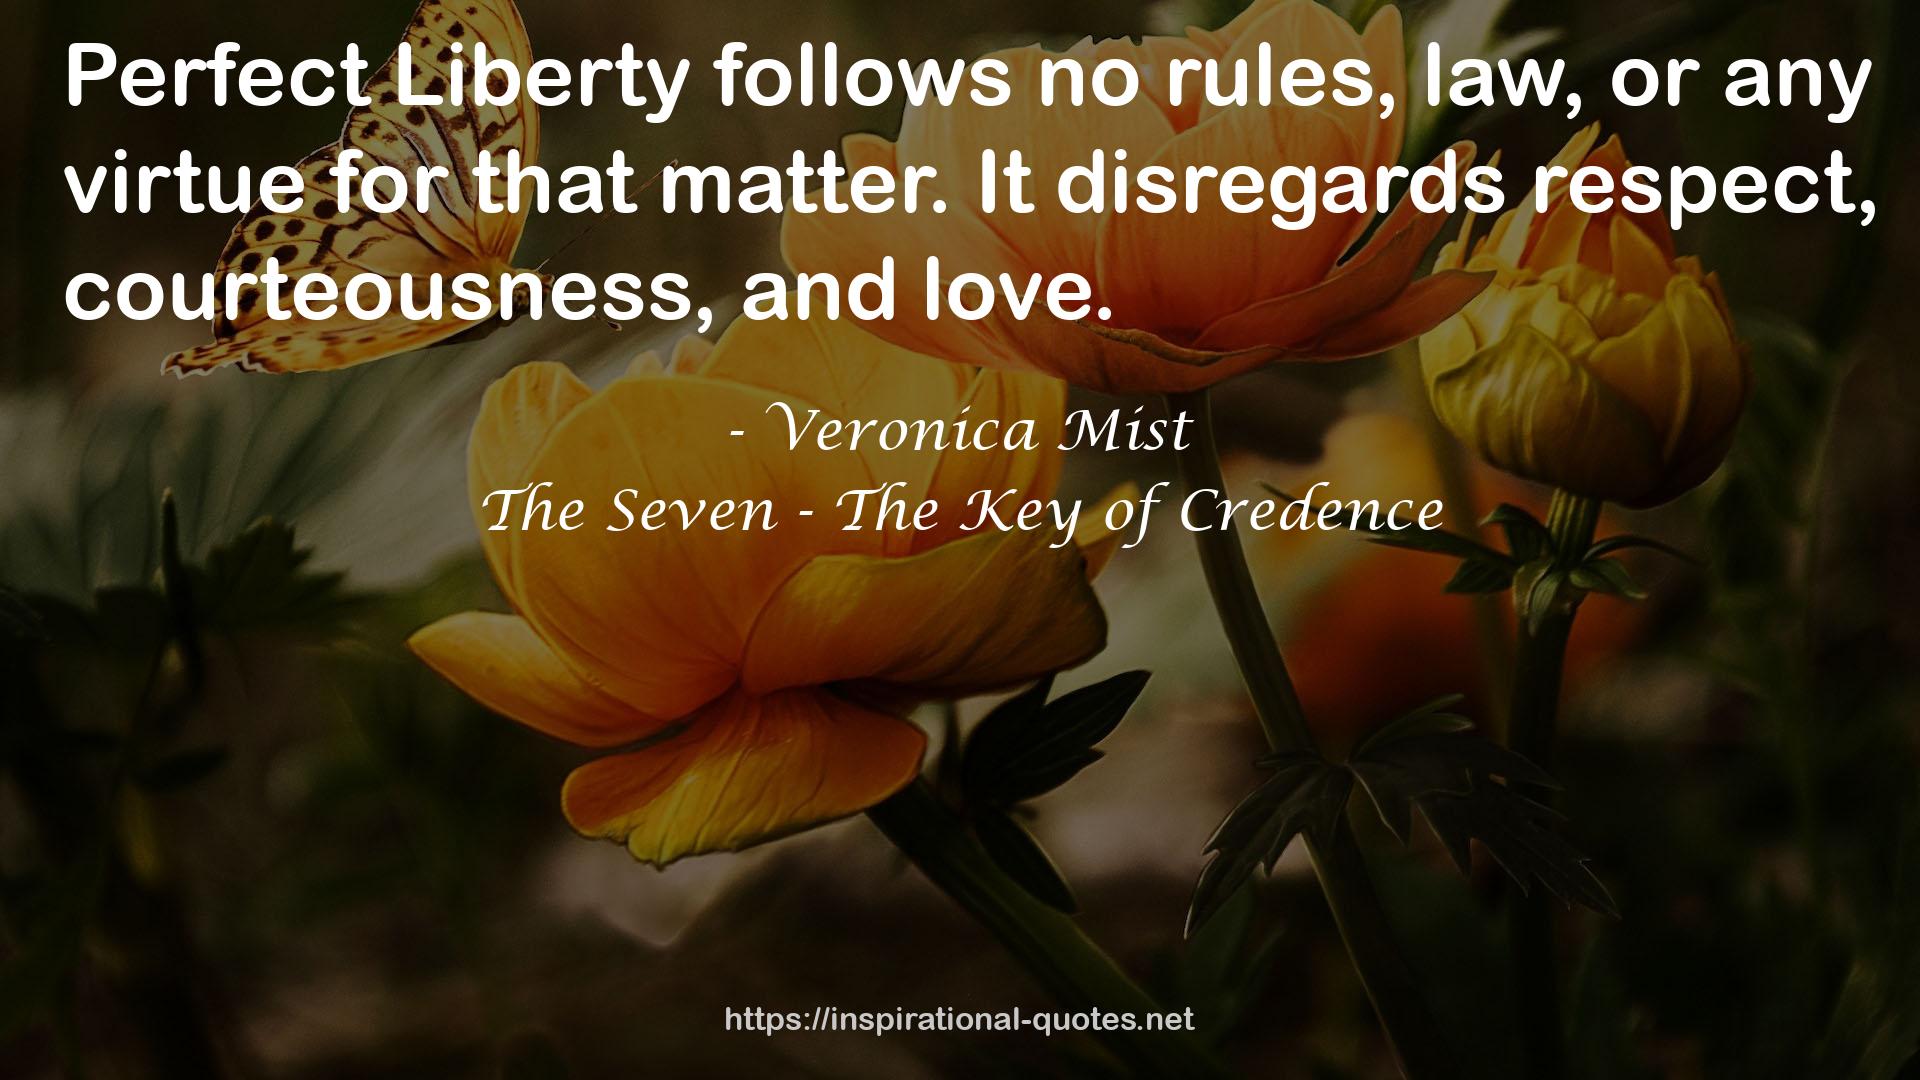 The Seven - The Key of Credence QUOTES